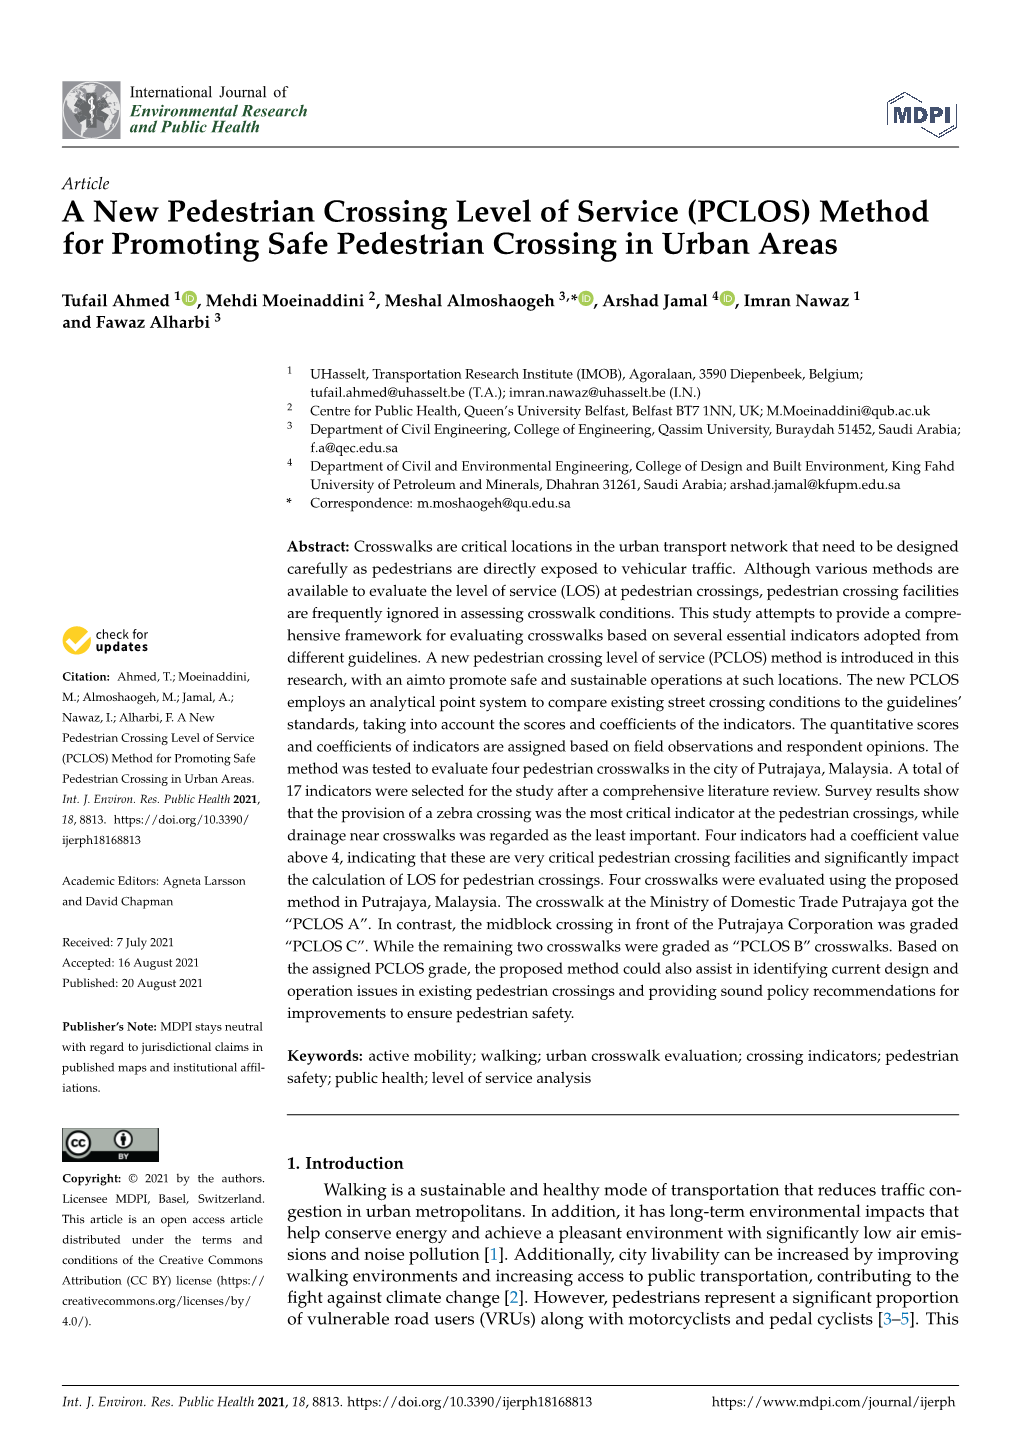 (PCLOS) Method for Promoting Safe Pedestrian Crossing in Urban Areas